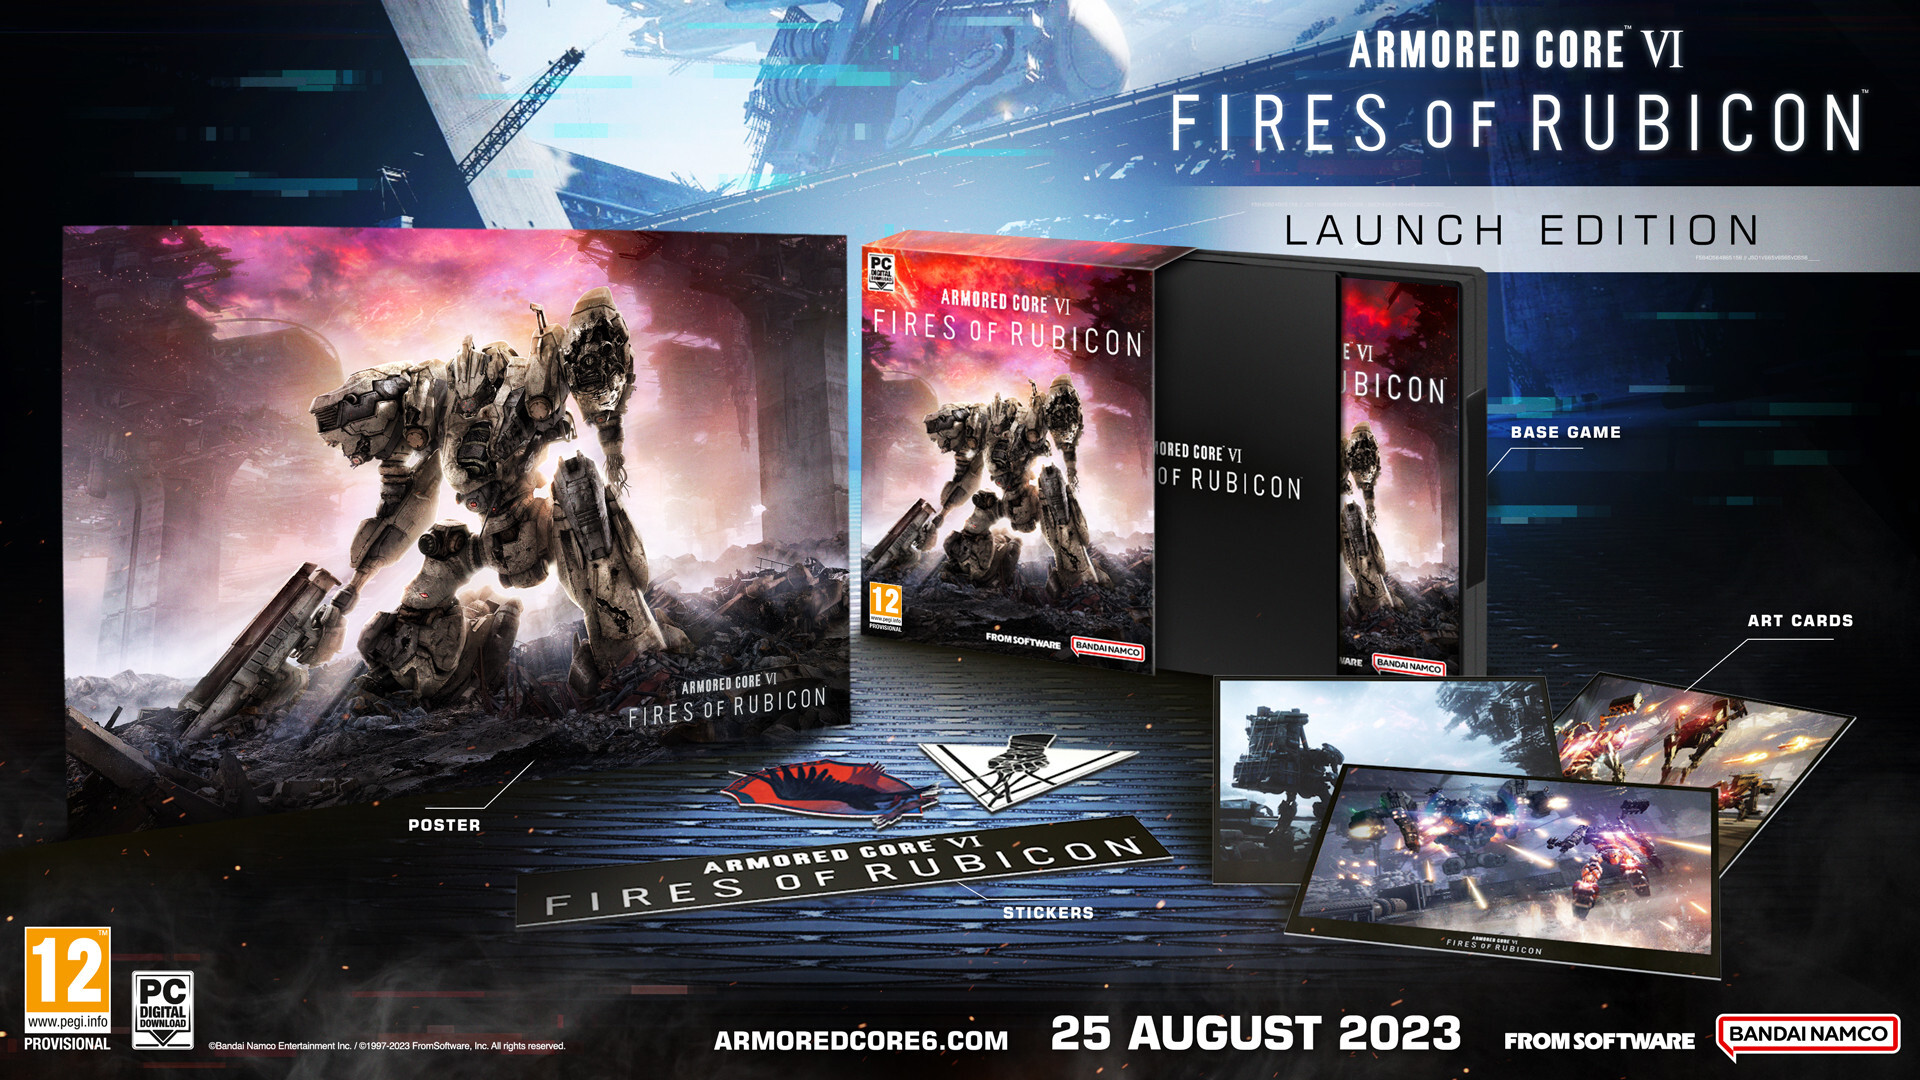 Namco Bandai armored core 6 fires of rubicon launch edition PC